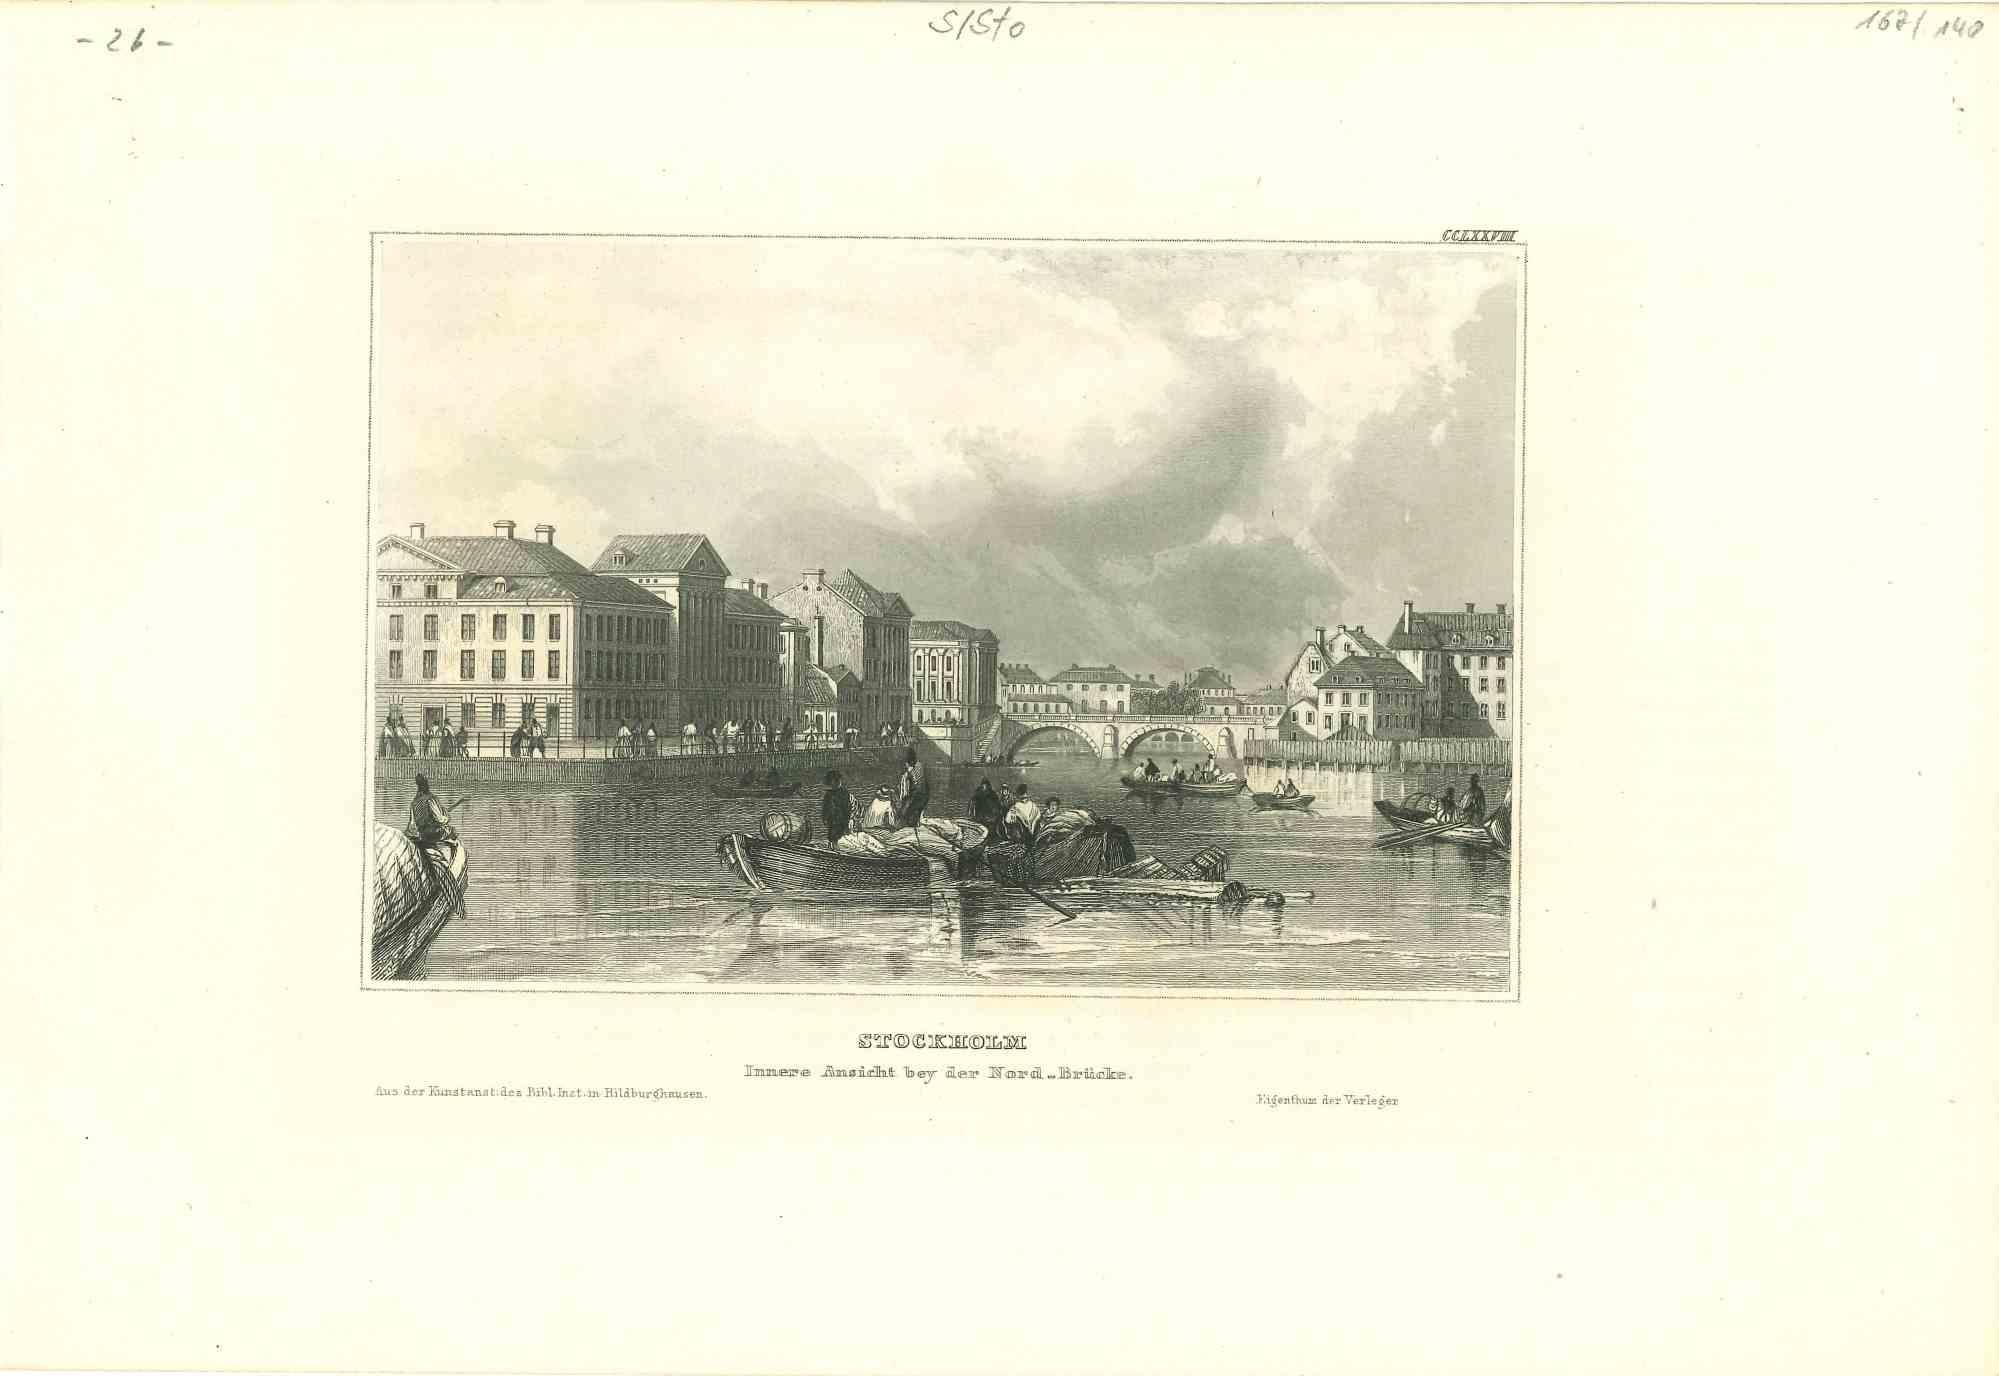 Unknown Figurative Print - Ancient View of Stockholm - Original Lithograph - Mid-19th Century